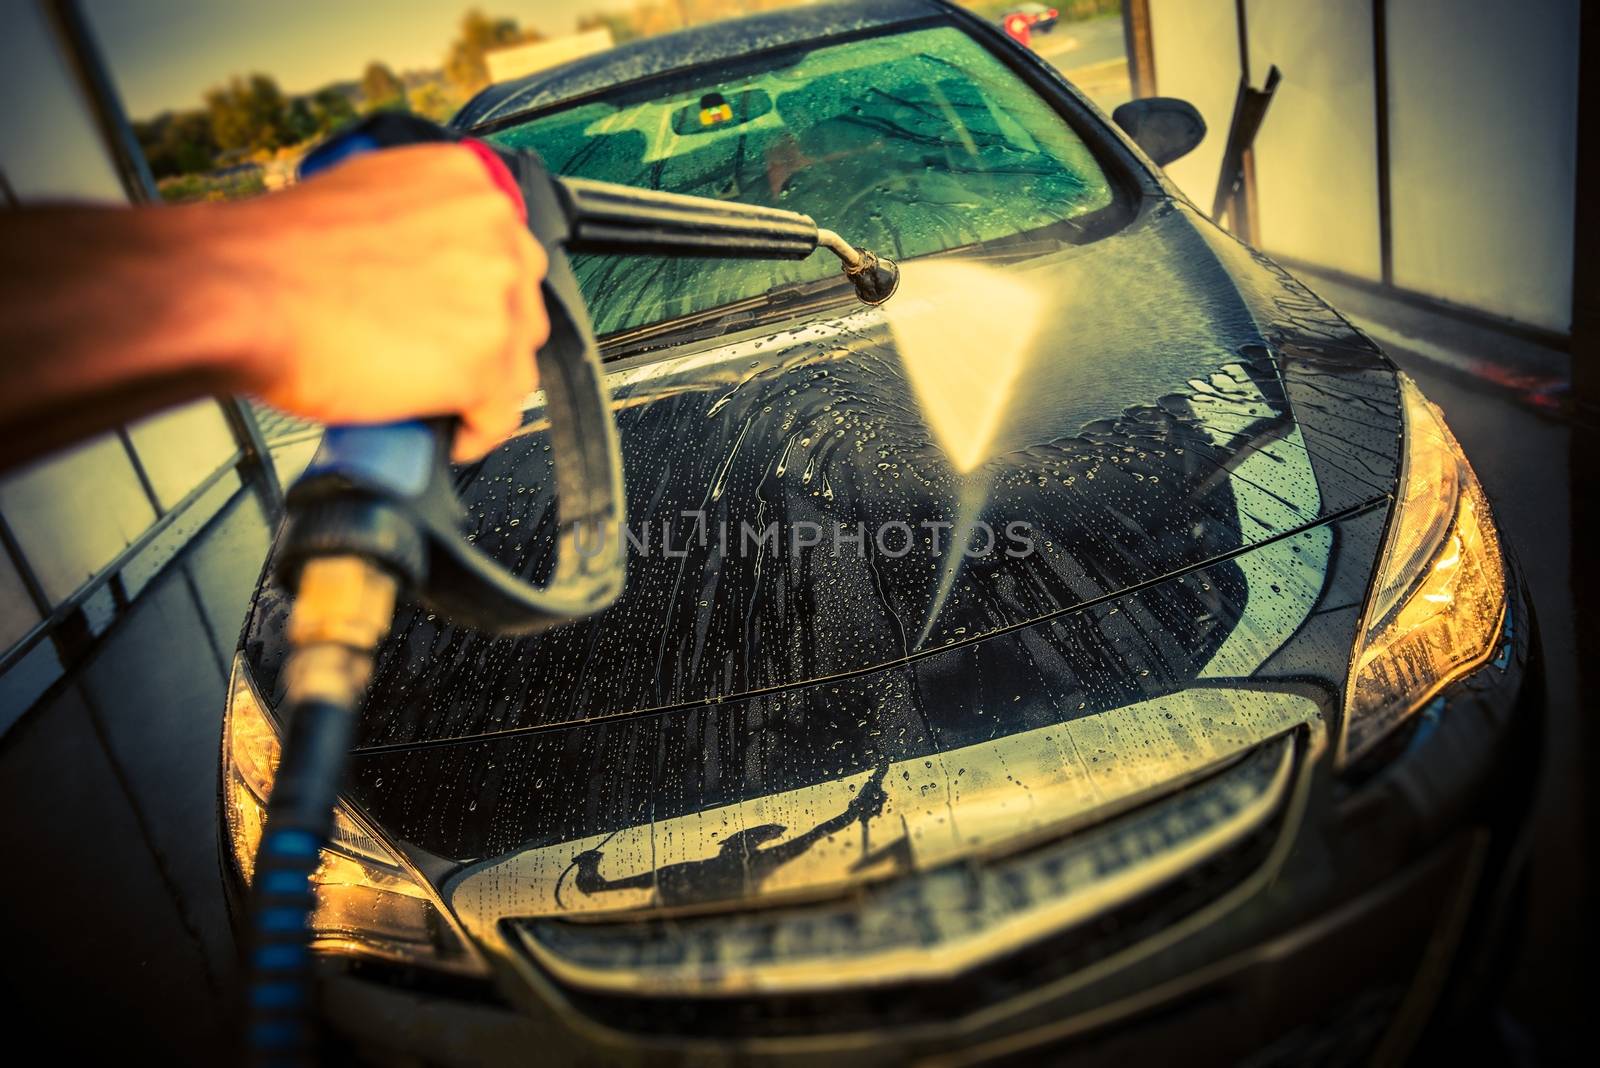 Car Cleaning in a Car Wash by welcomia